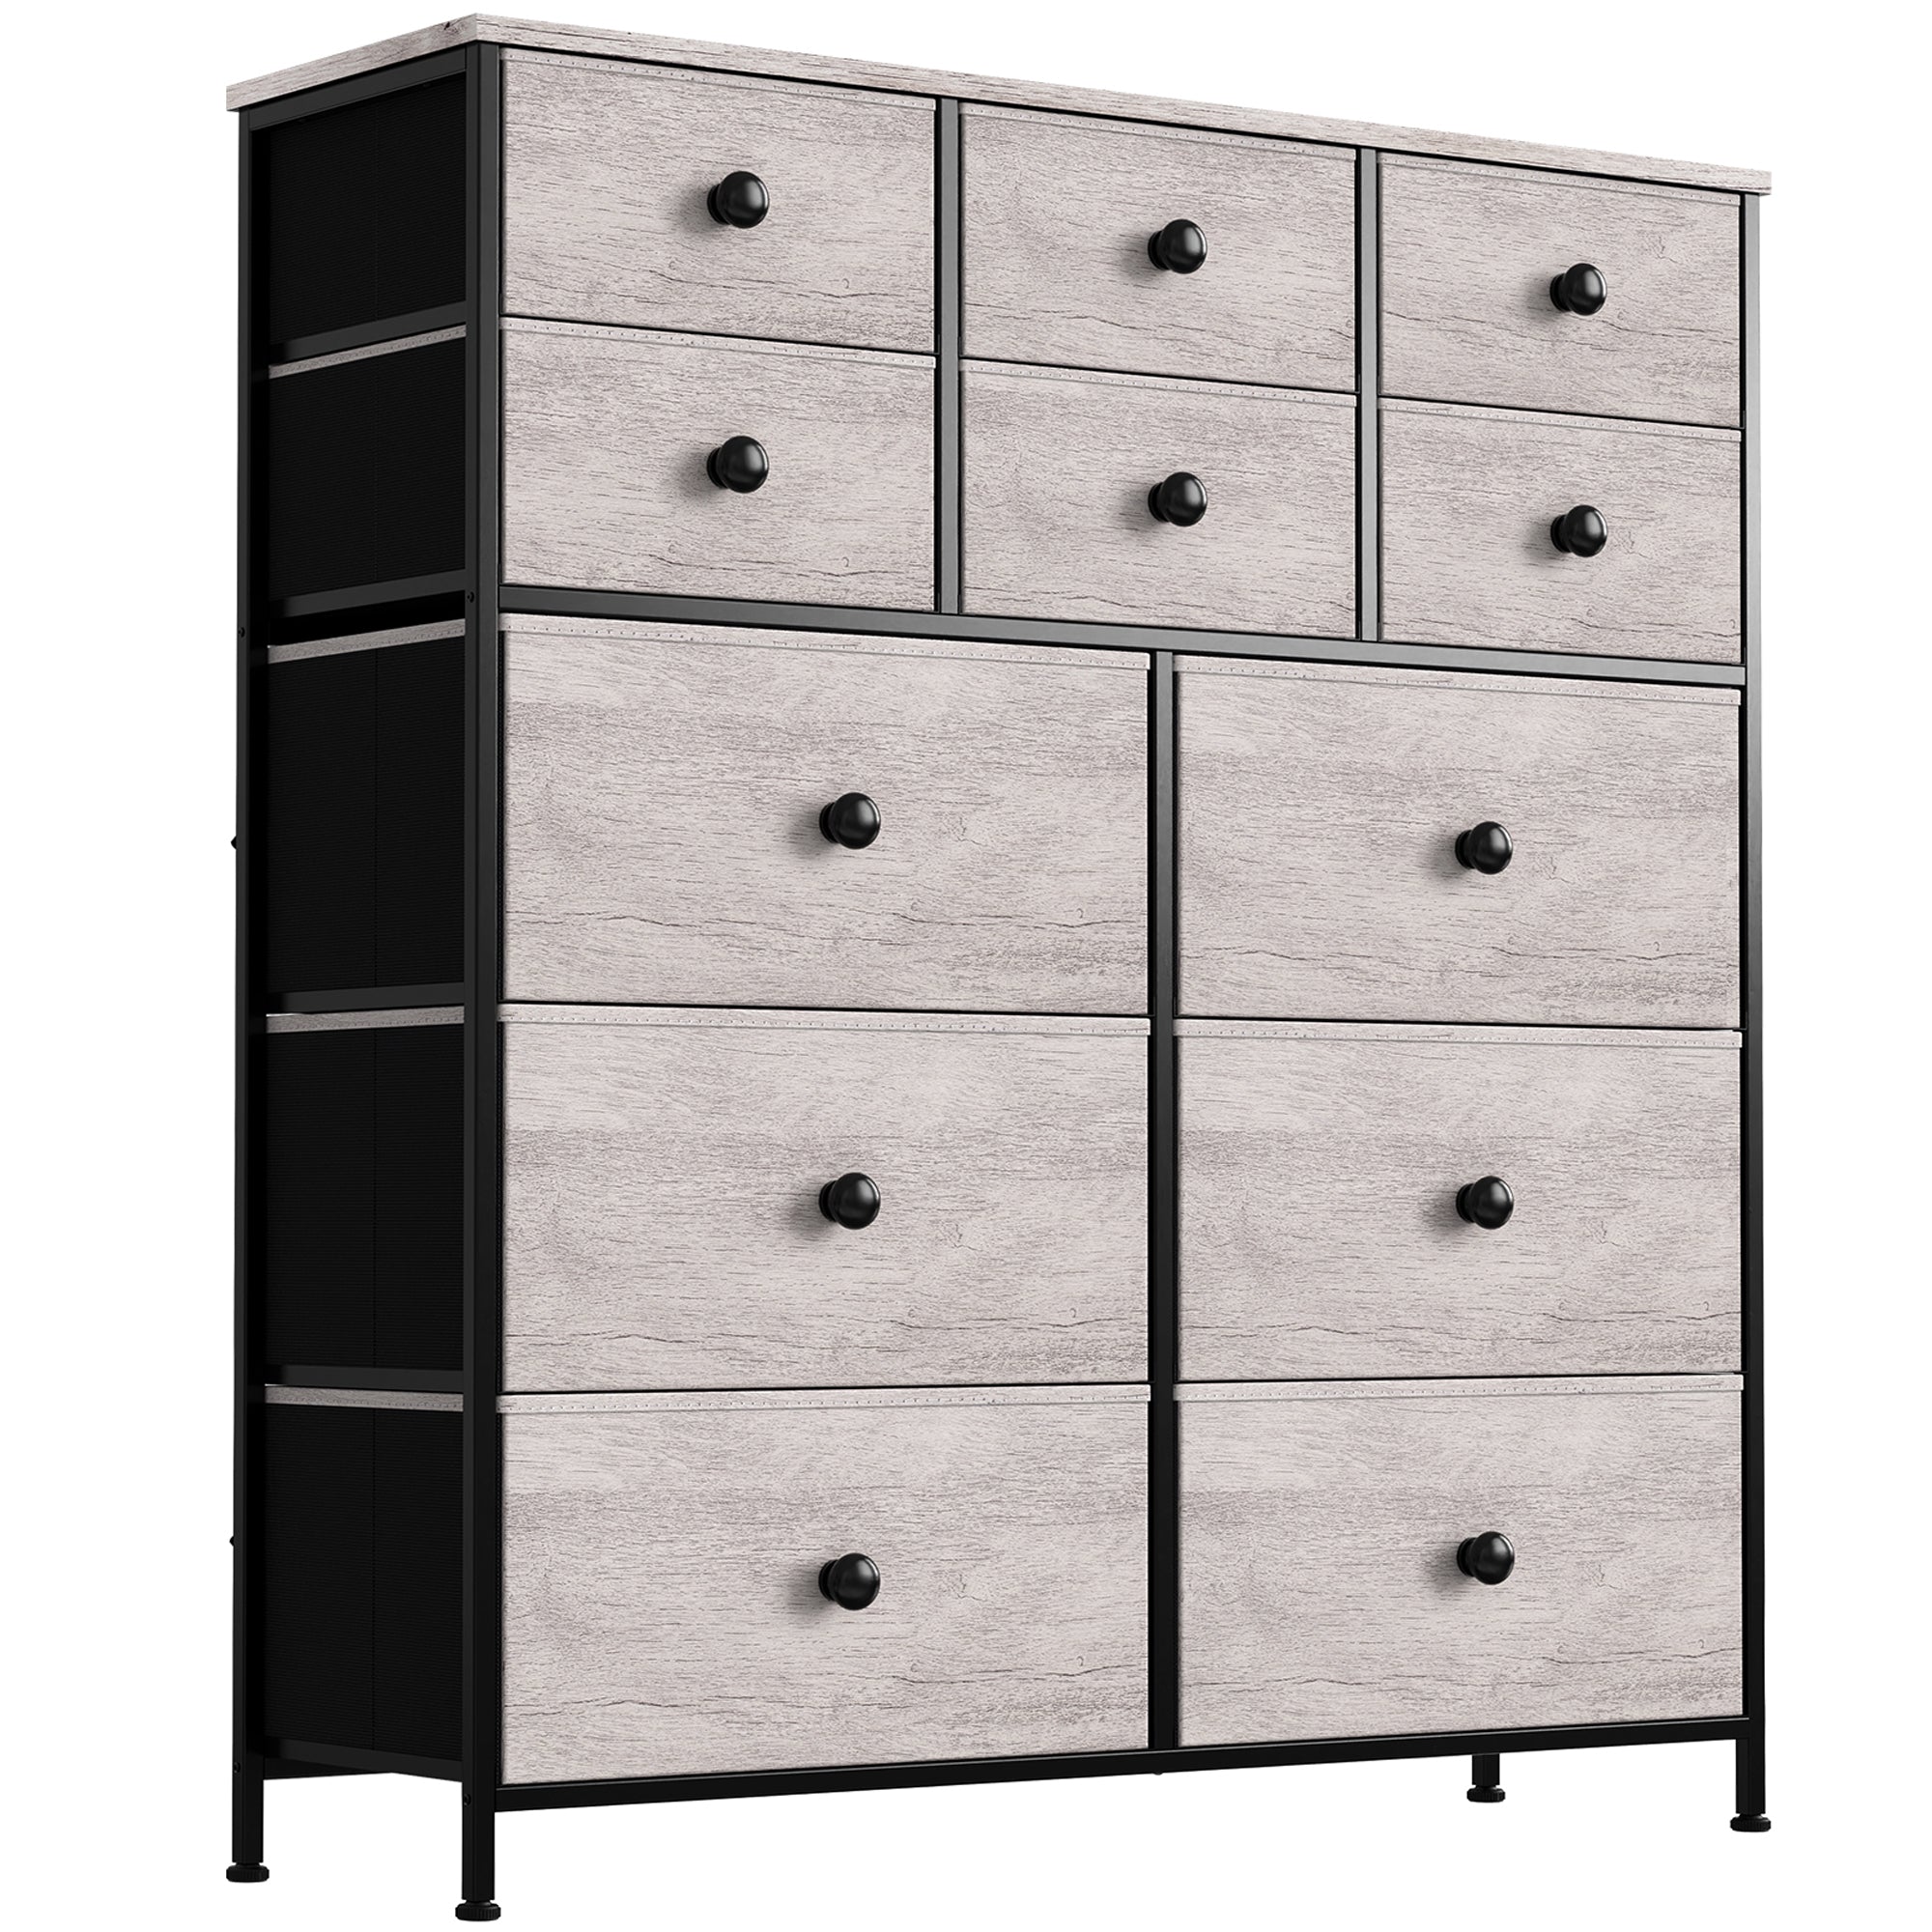 AOBABO 3 Drawer Lateral File Cabinet w/ Lock for Letter/Legal Size